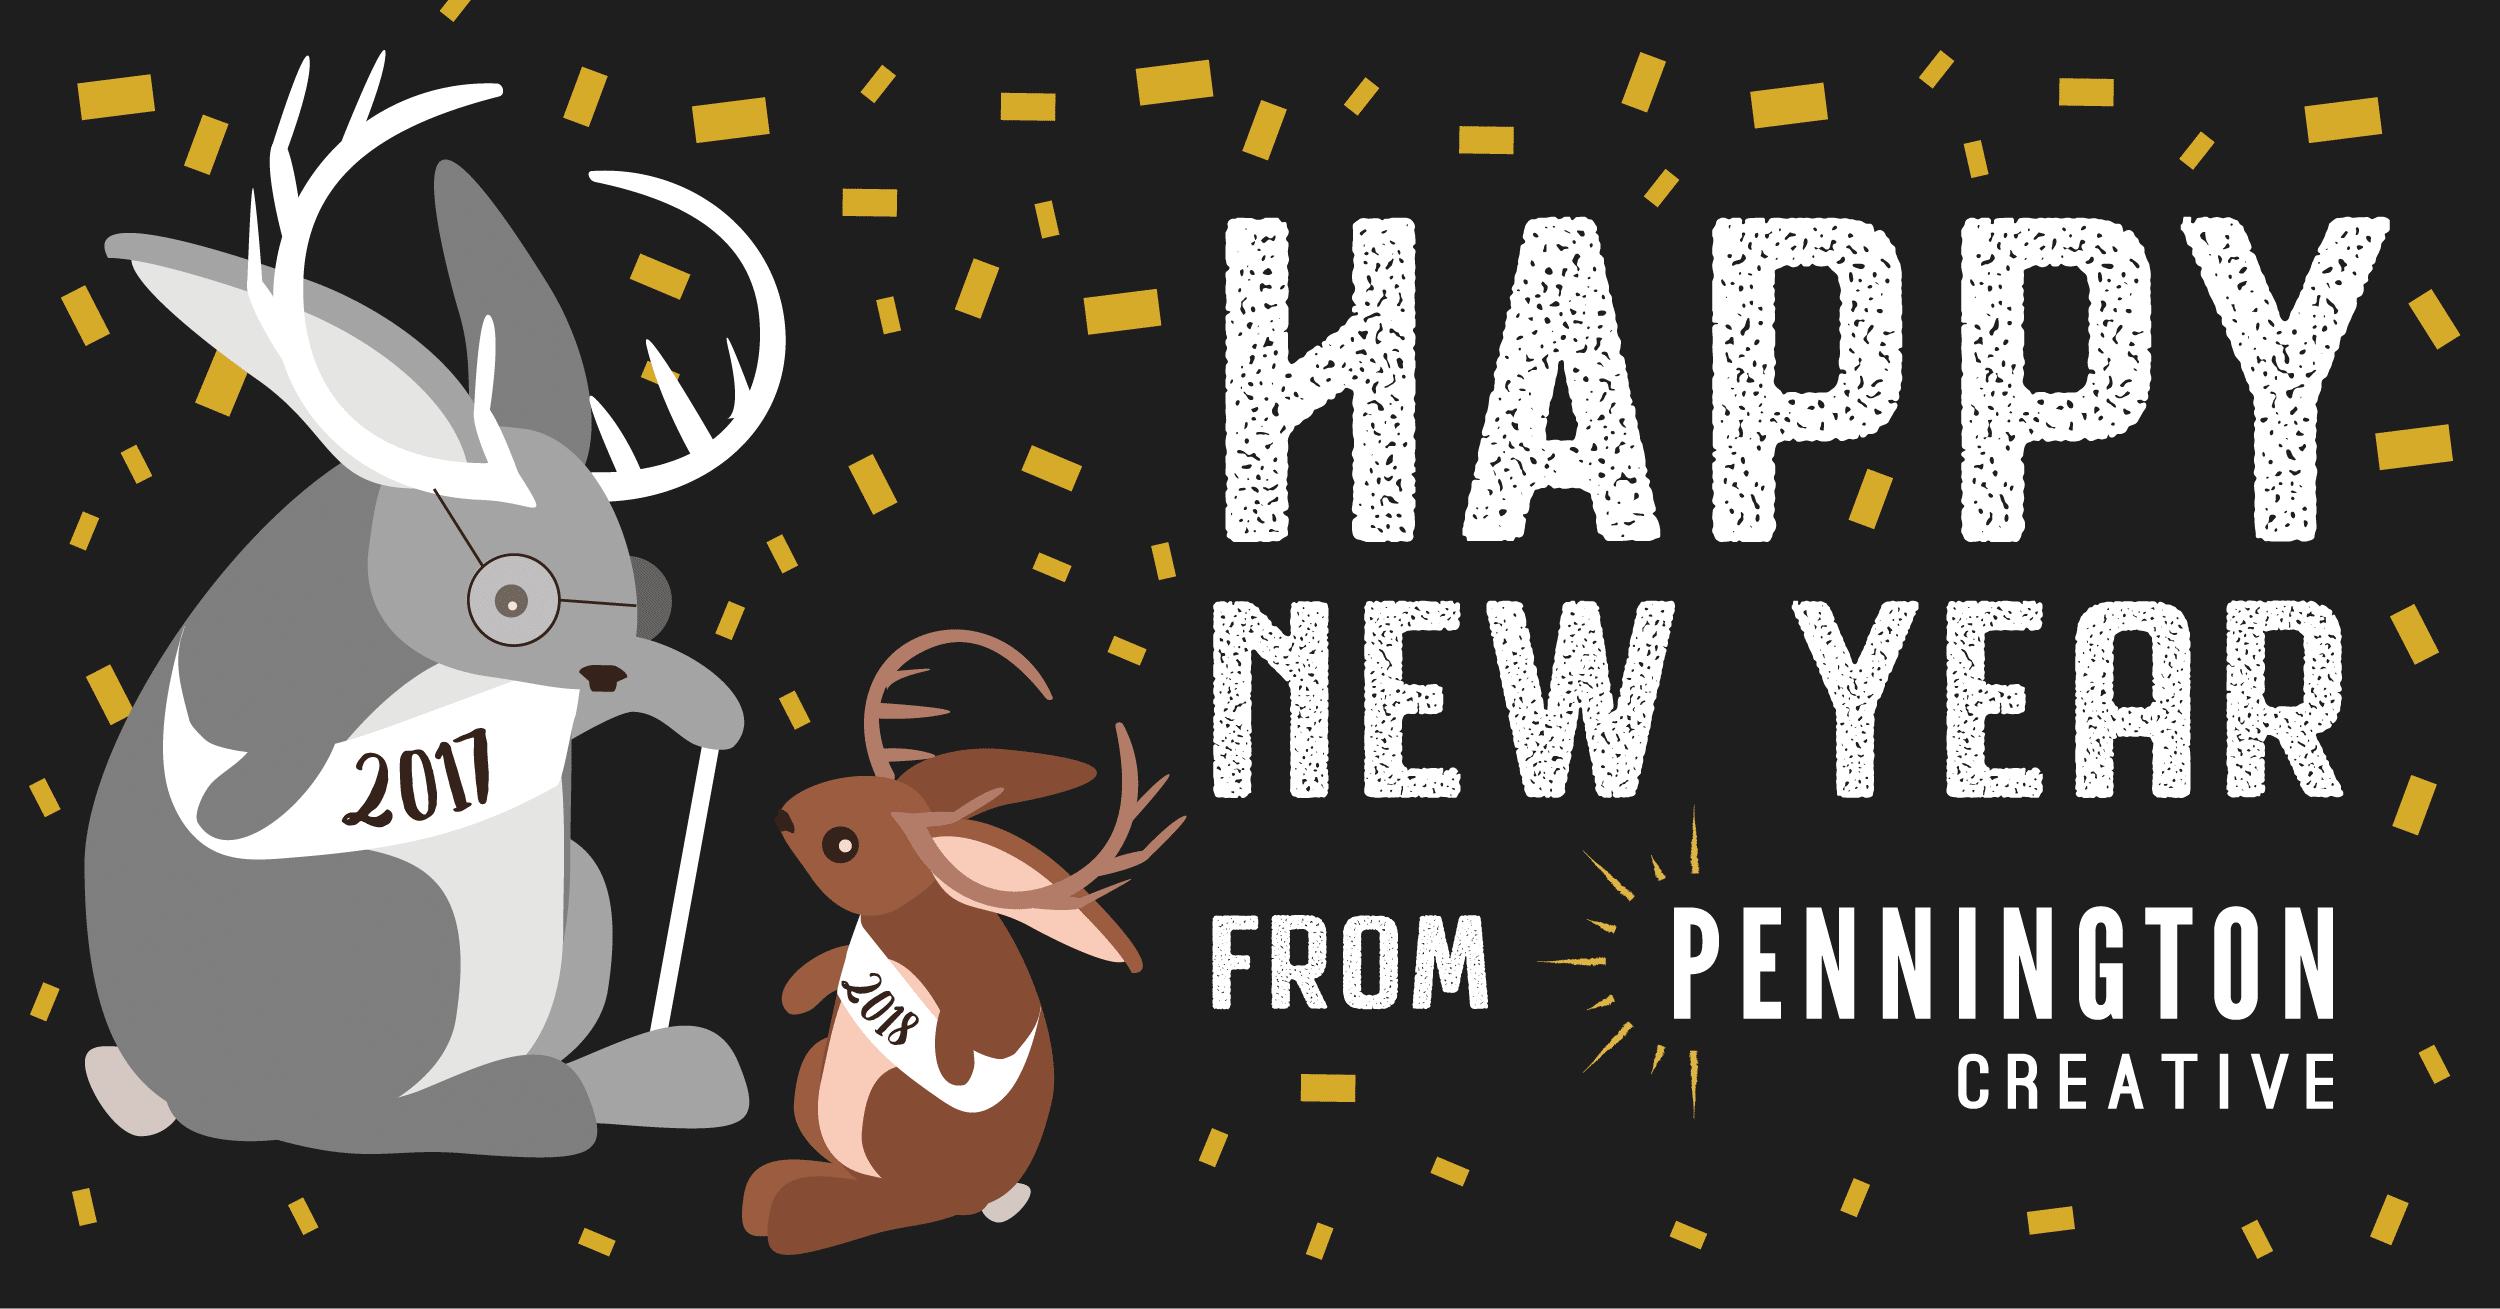 New Year's card with an old jackalope and a young jackalope.